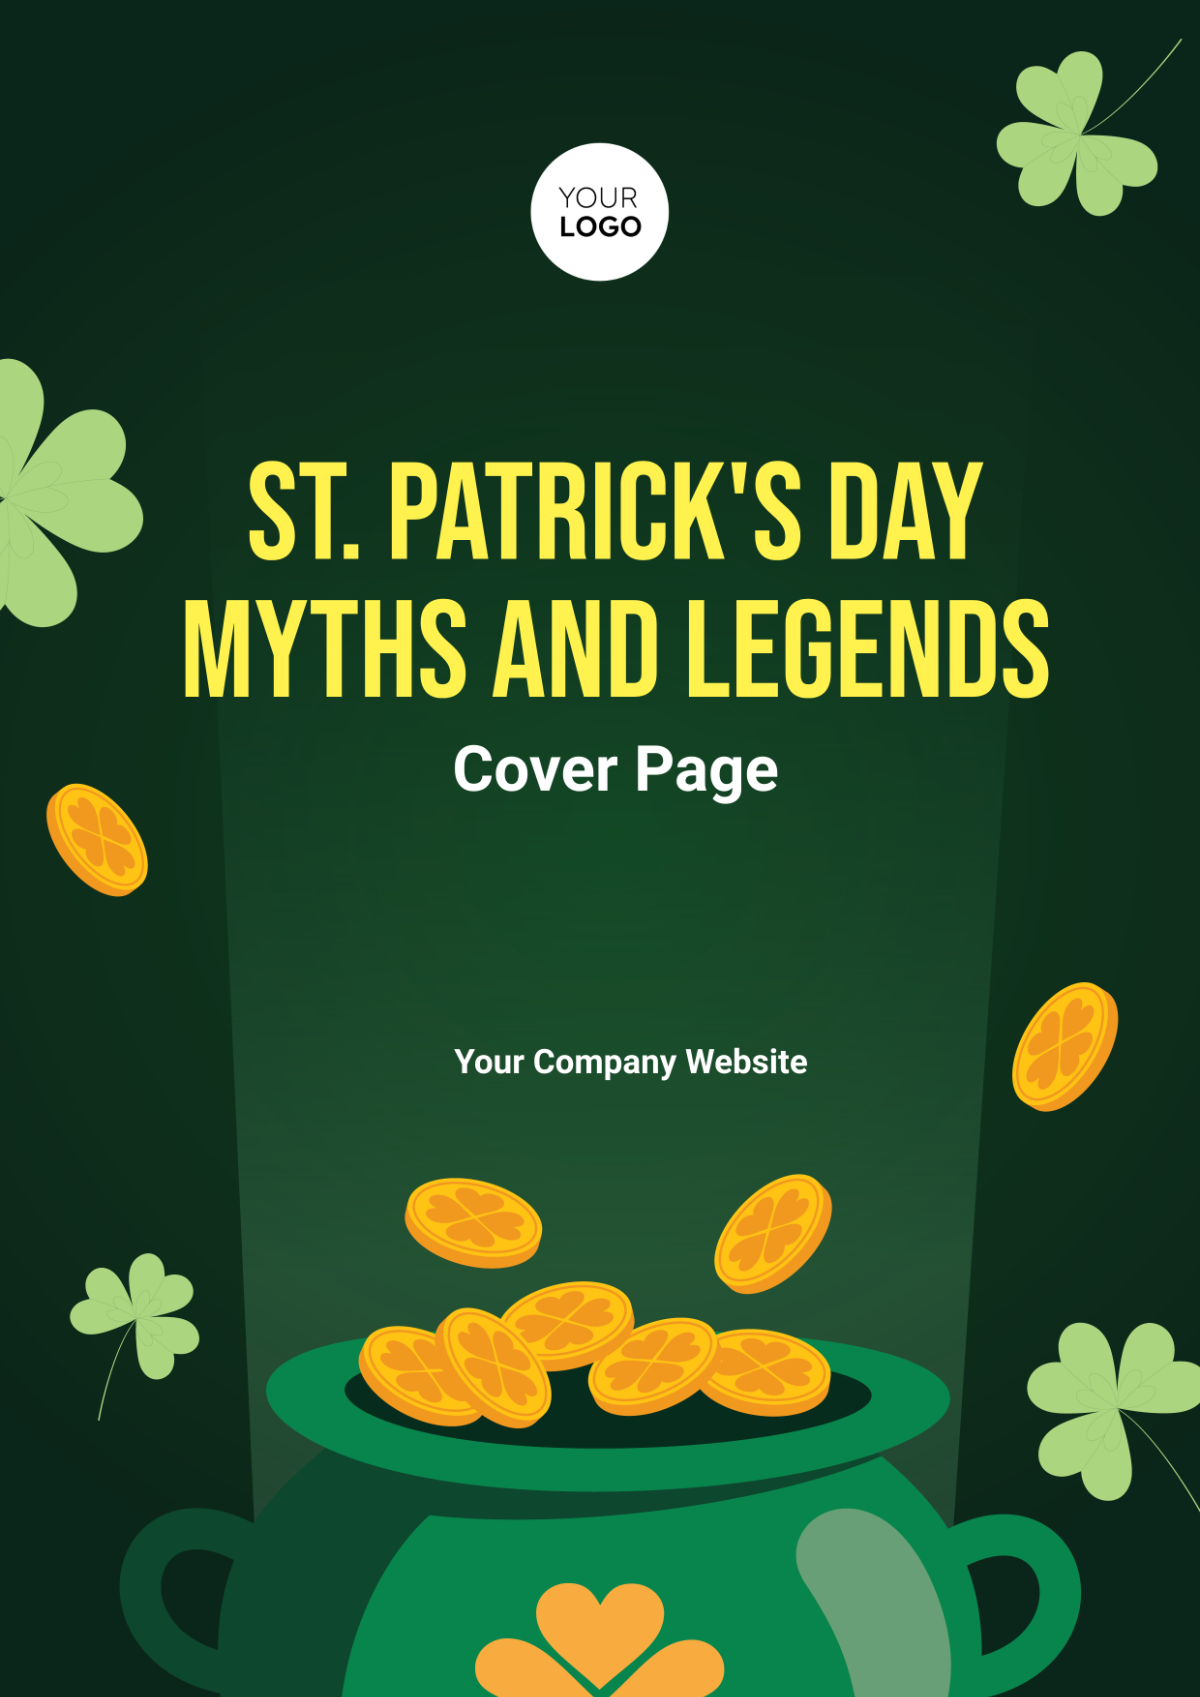 Free St. Patrick's Day Myths and Legends Cover Page Template